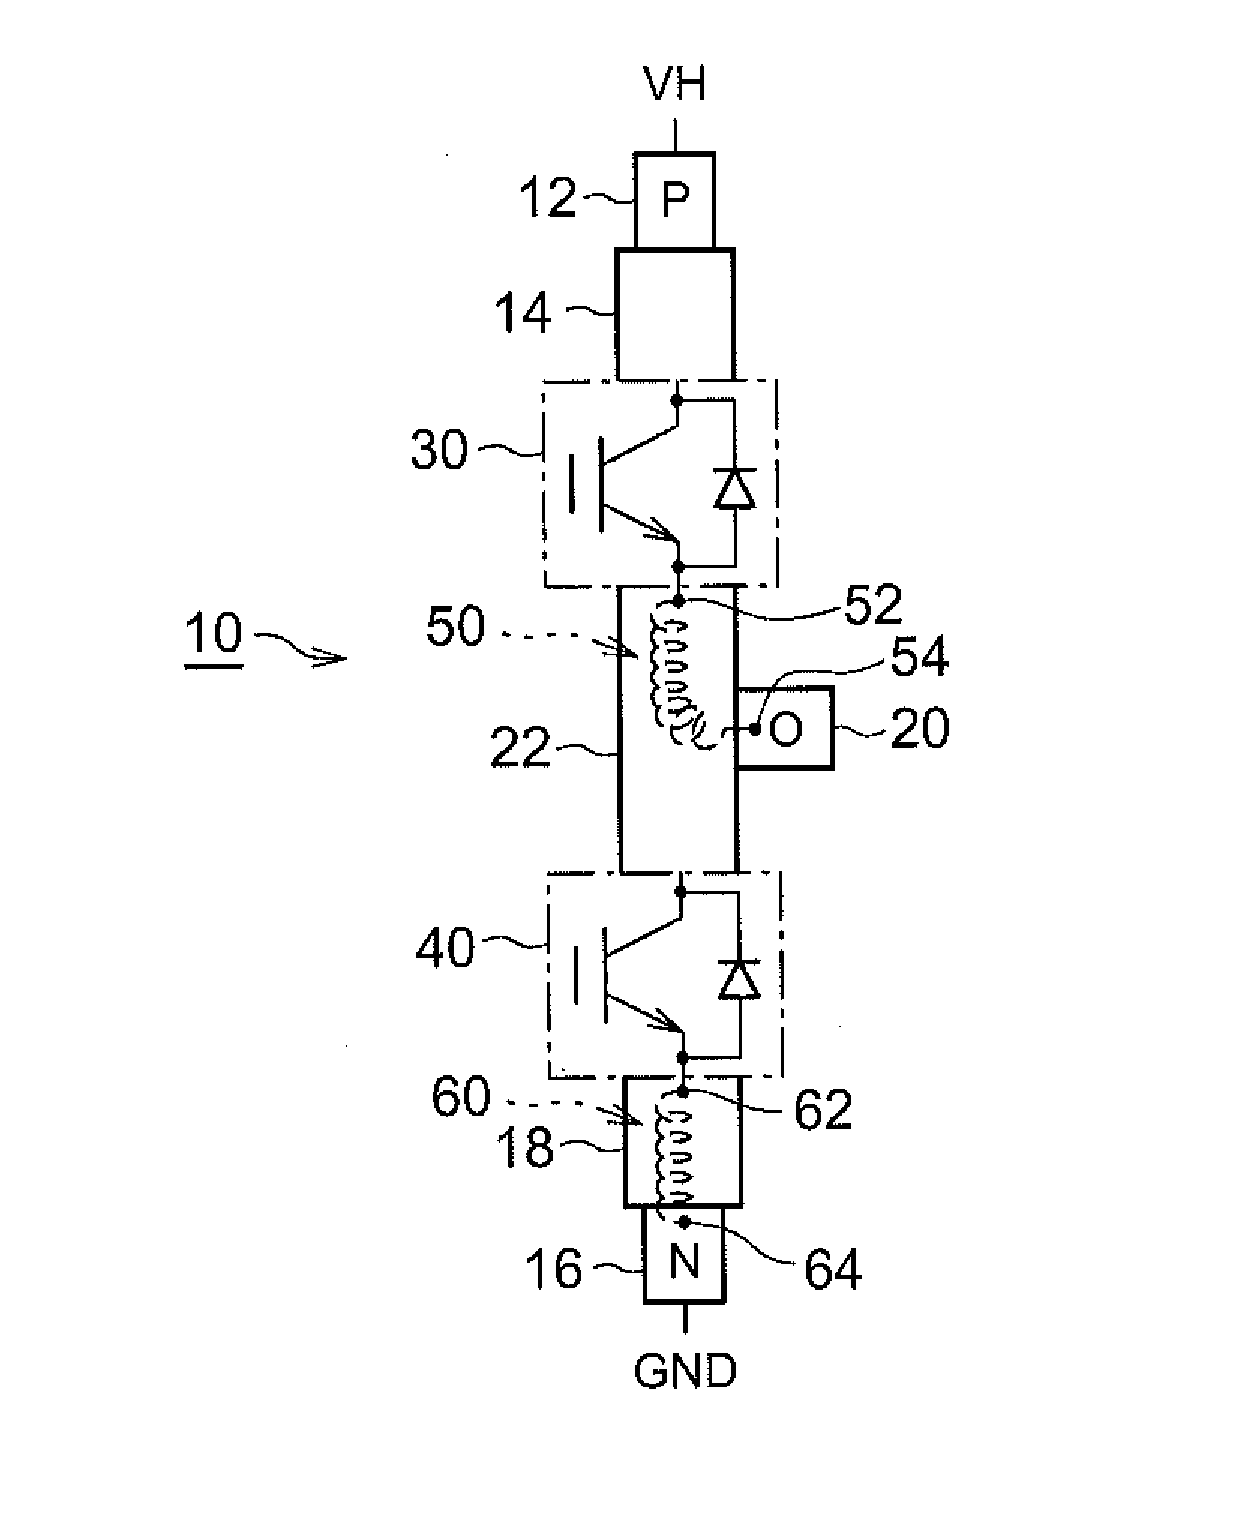 Electric Power Conversion Device